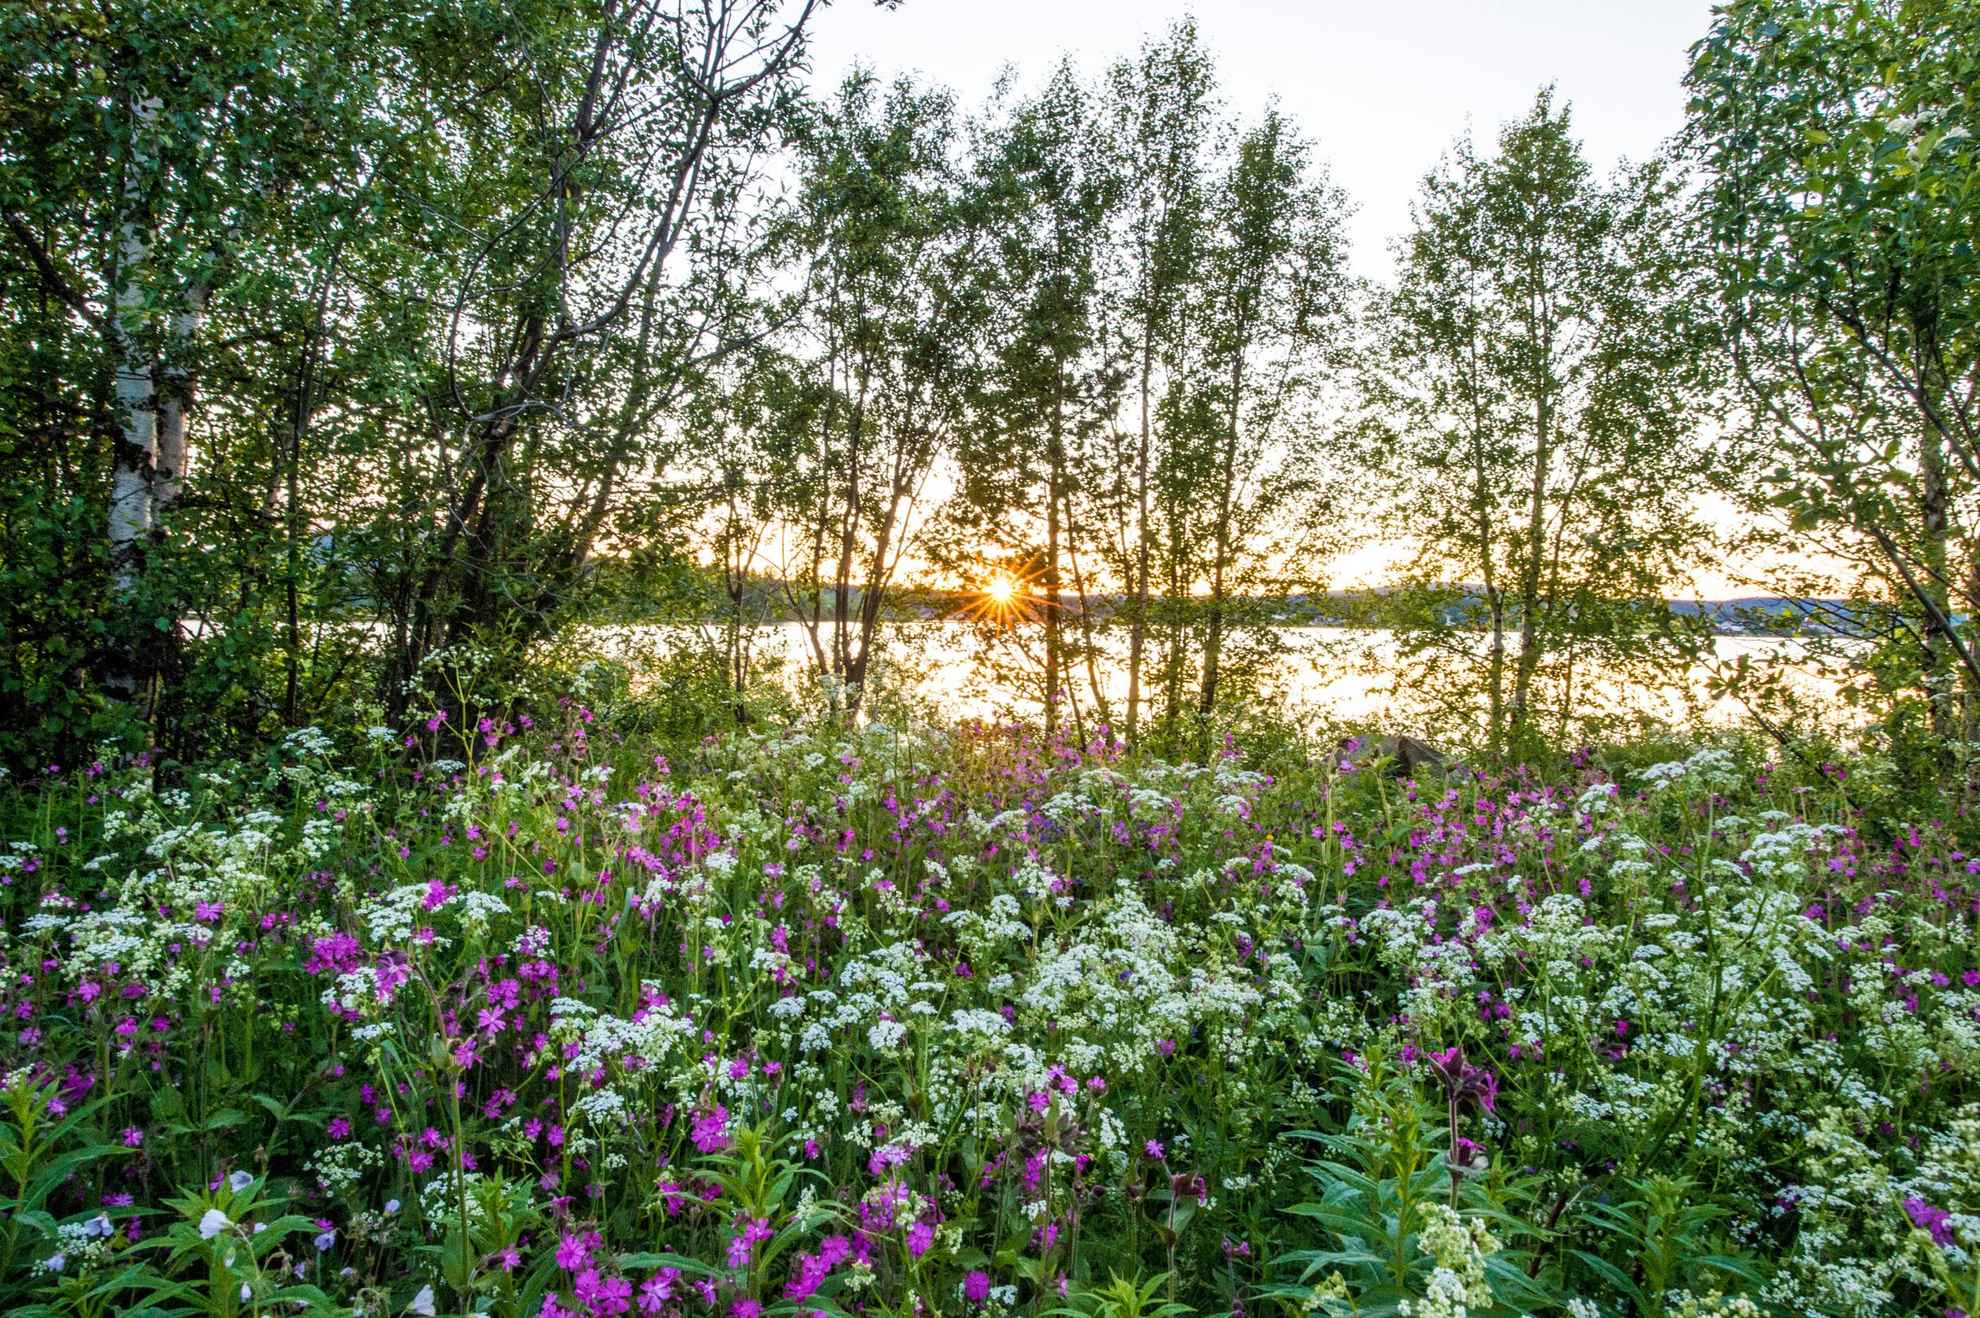 Nature view with wild flowers, trees and a lake in the backdrop.